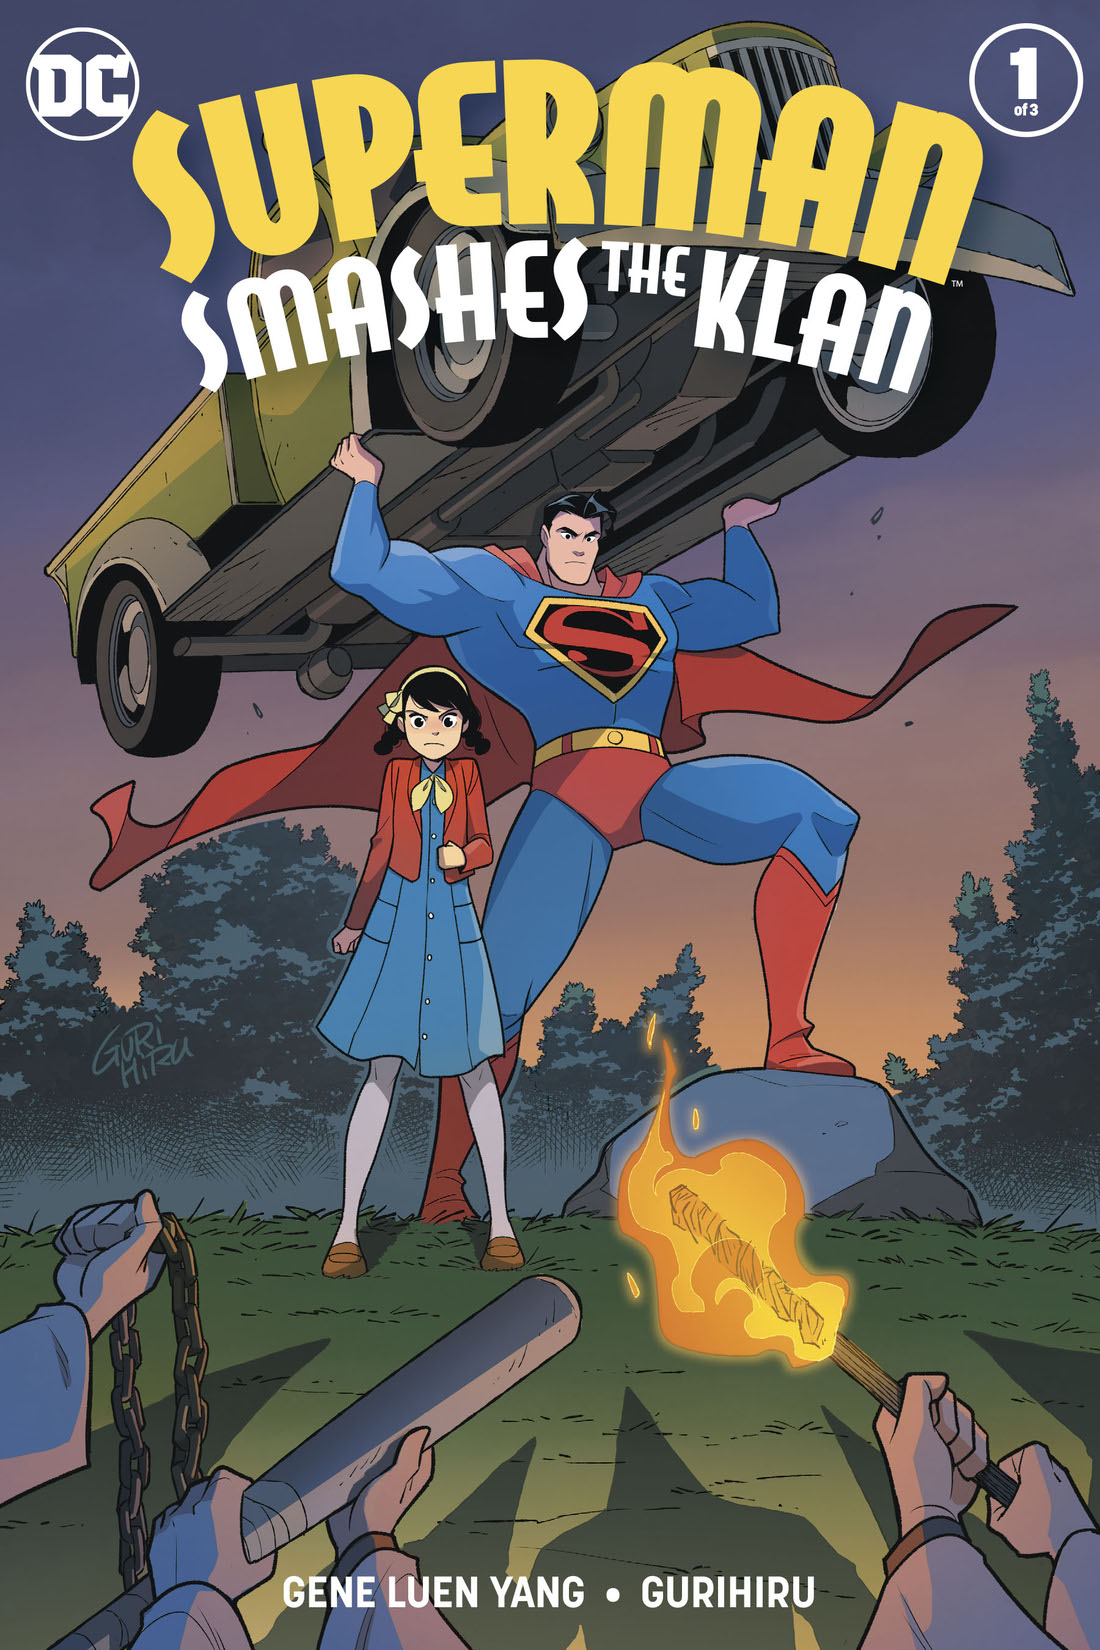 Superman Smashes the Klan (Periodical) #1 preview images